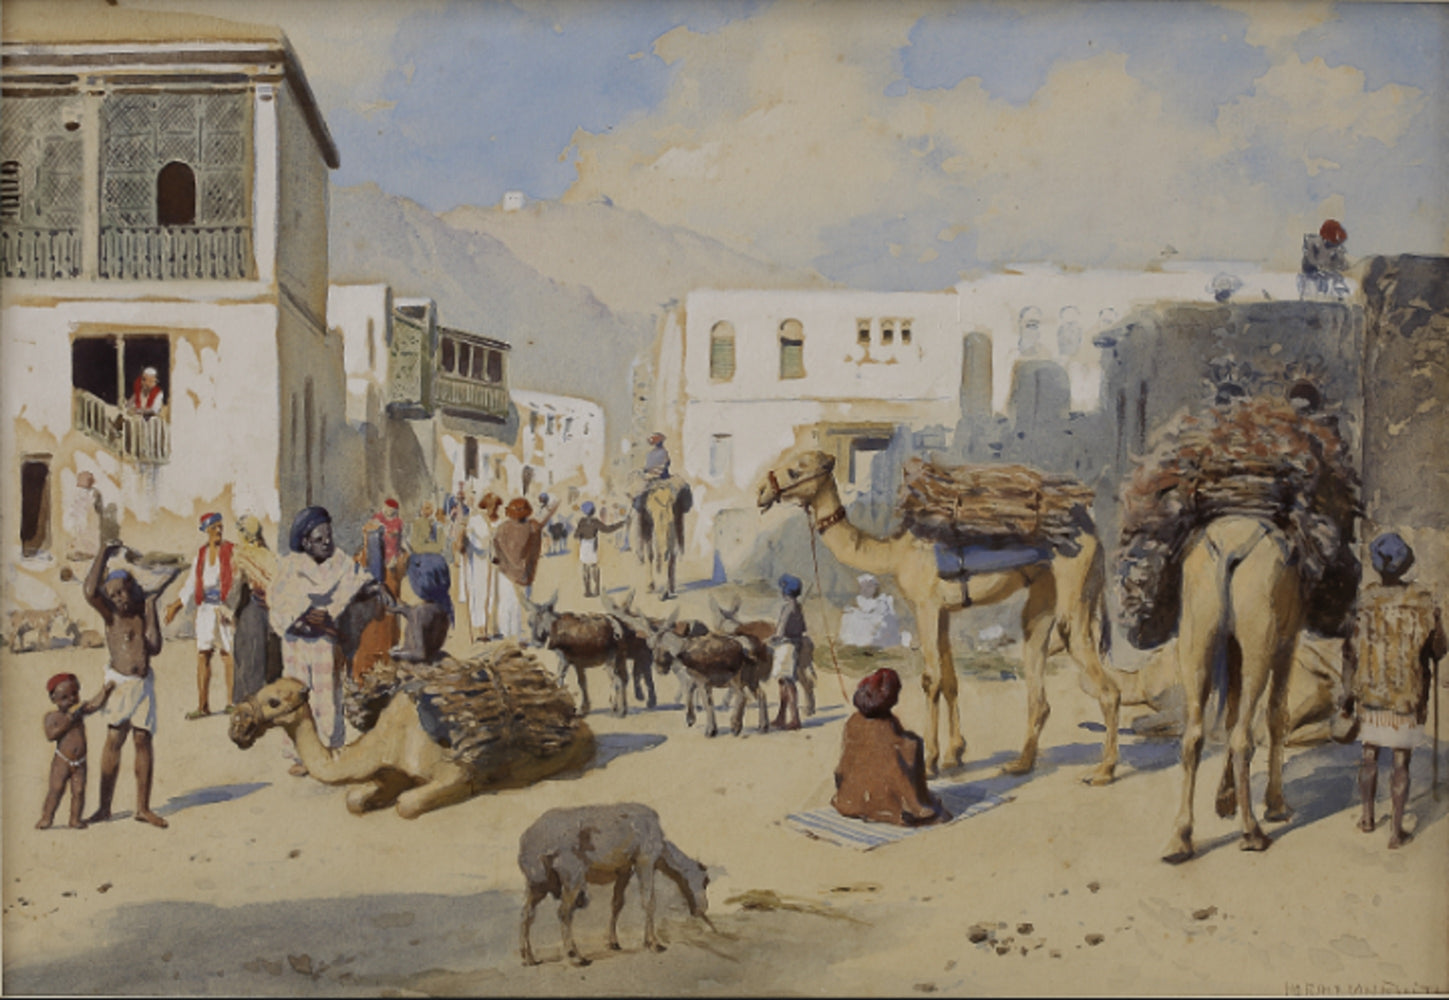 'A Market Square, Rajasthan' by Horace Van Ruith